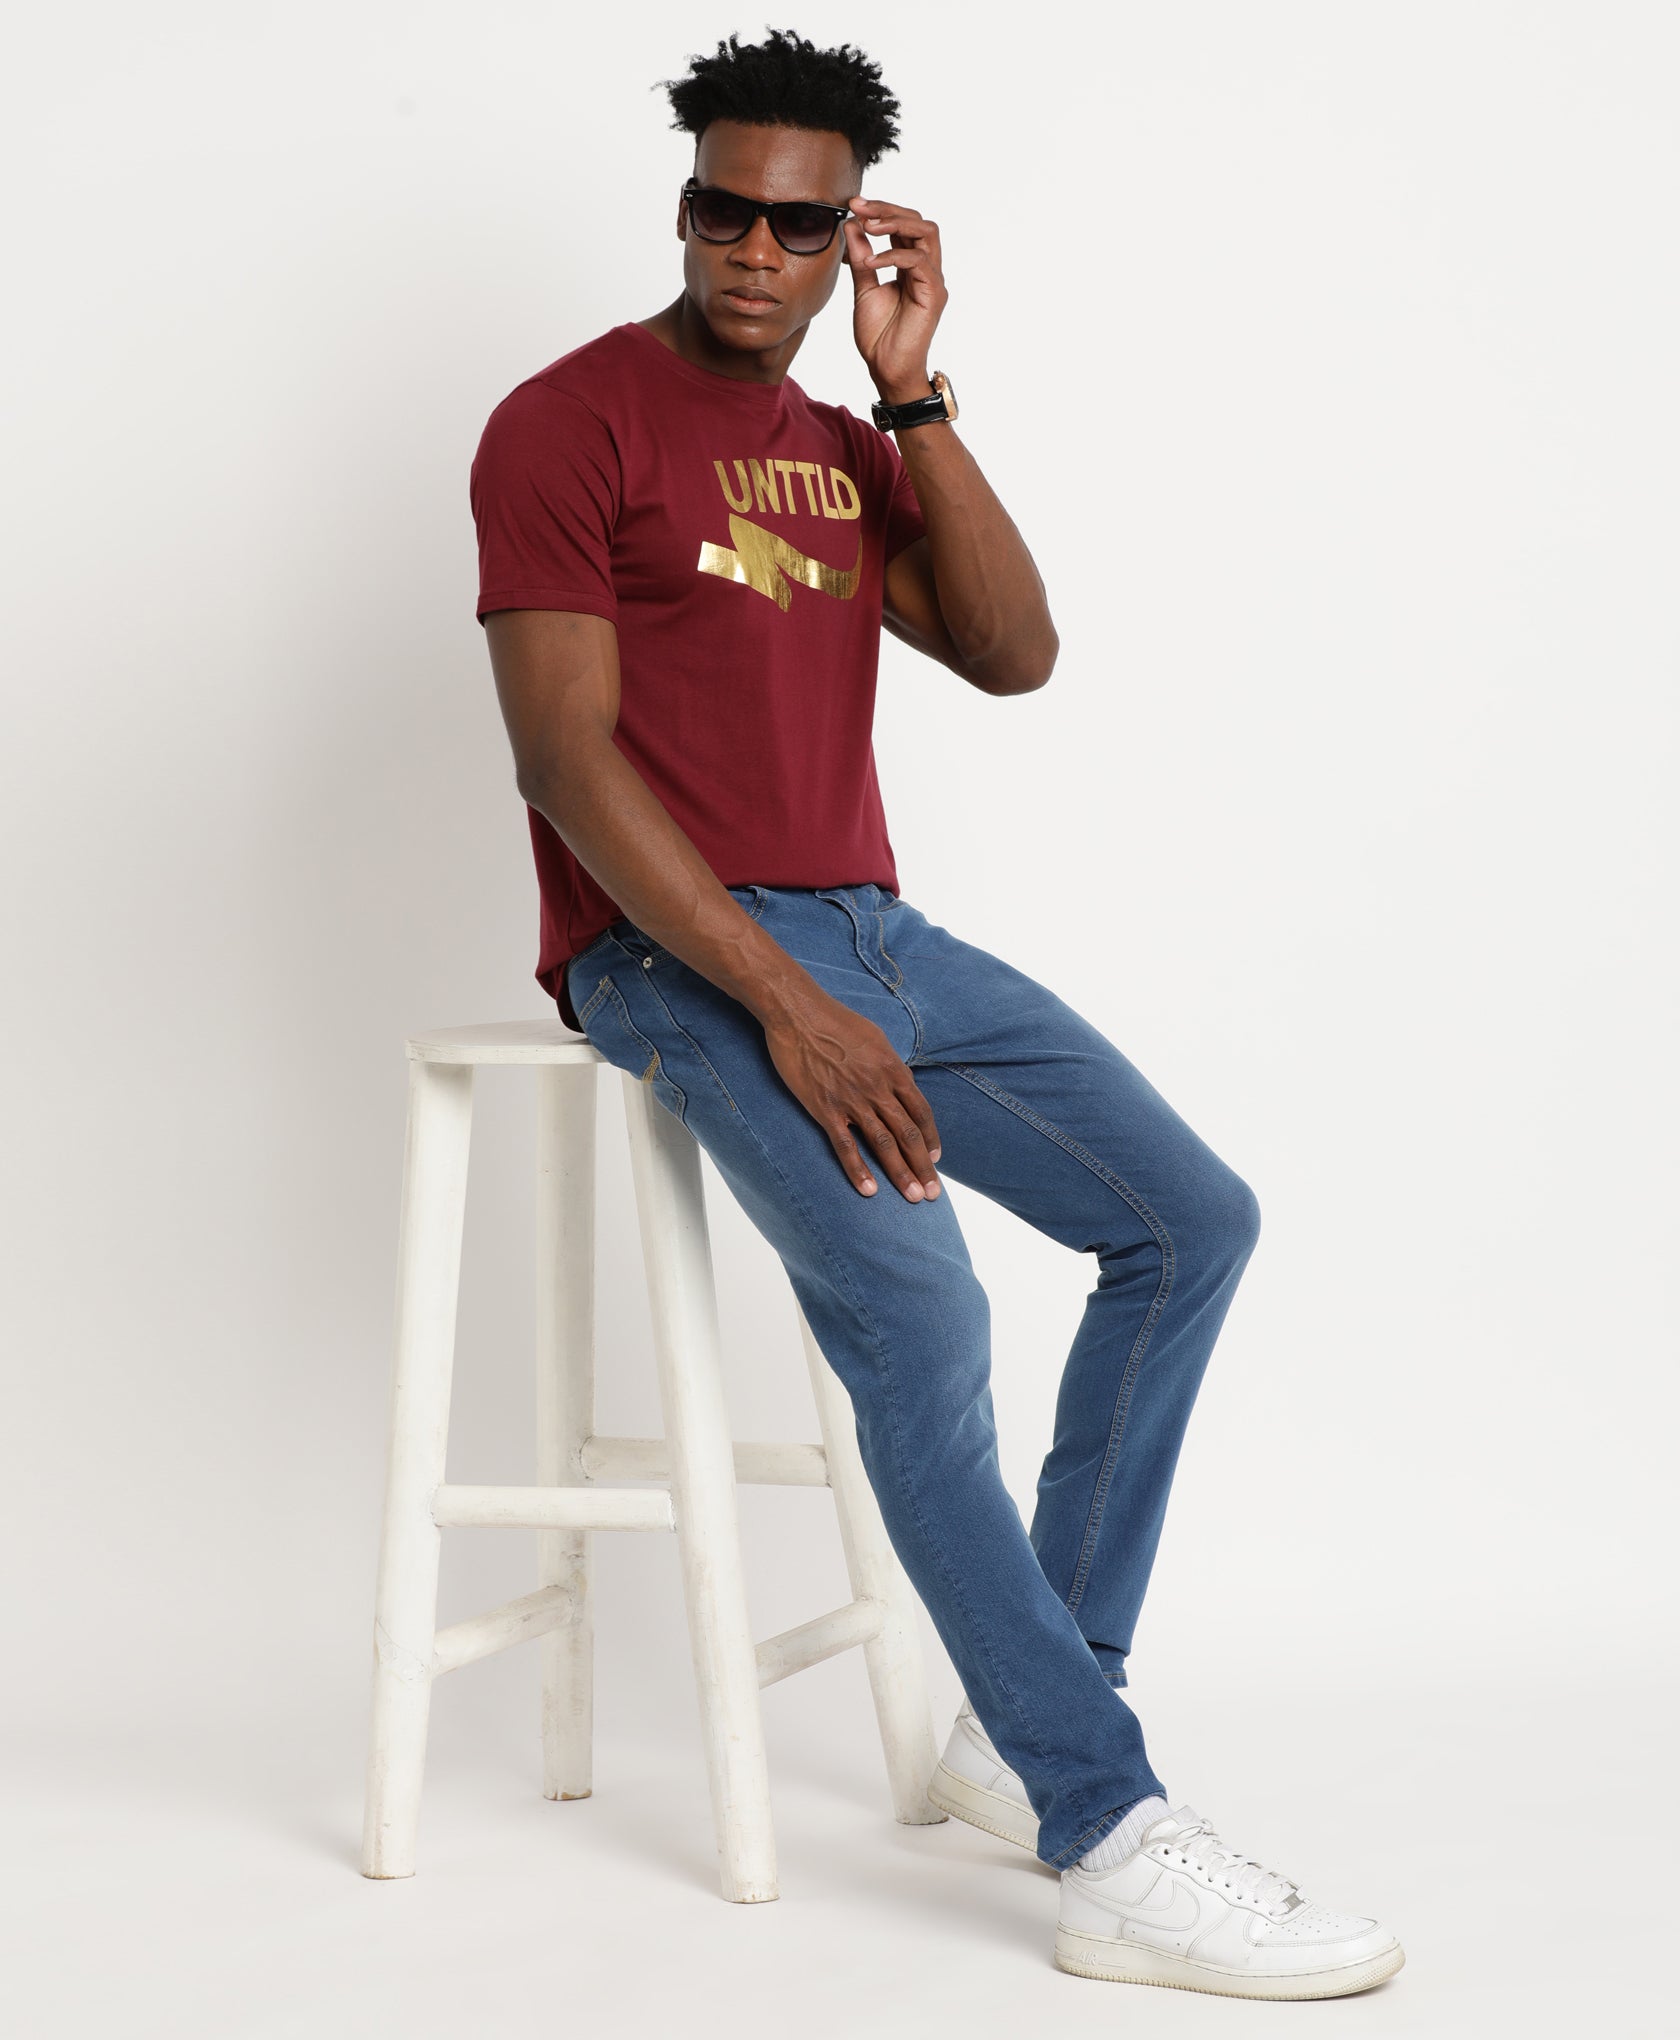 VOI Jeans Men's Maroon Slim Fit Shirt : Amazon.in: Clothing & Accessories